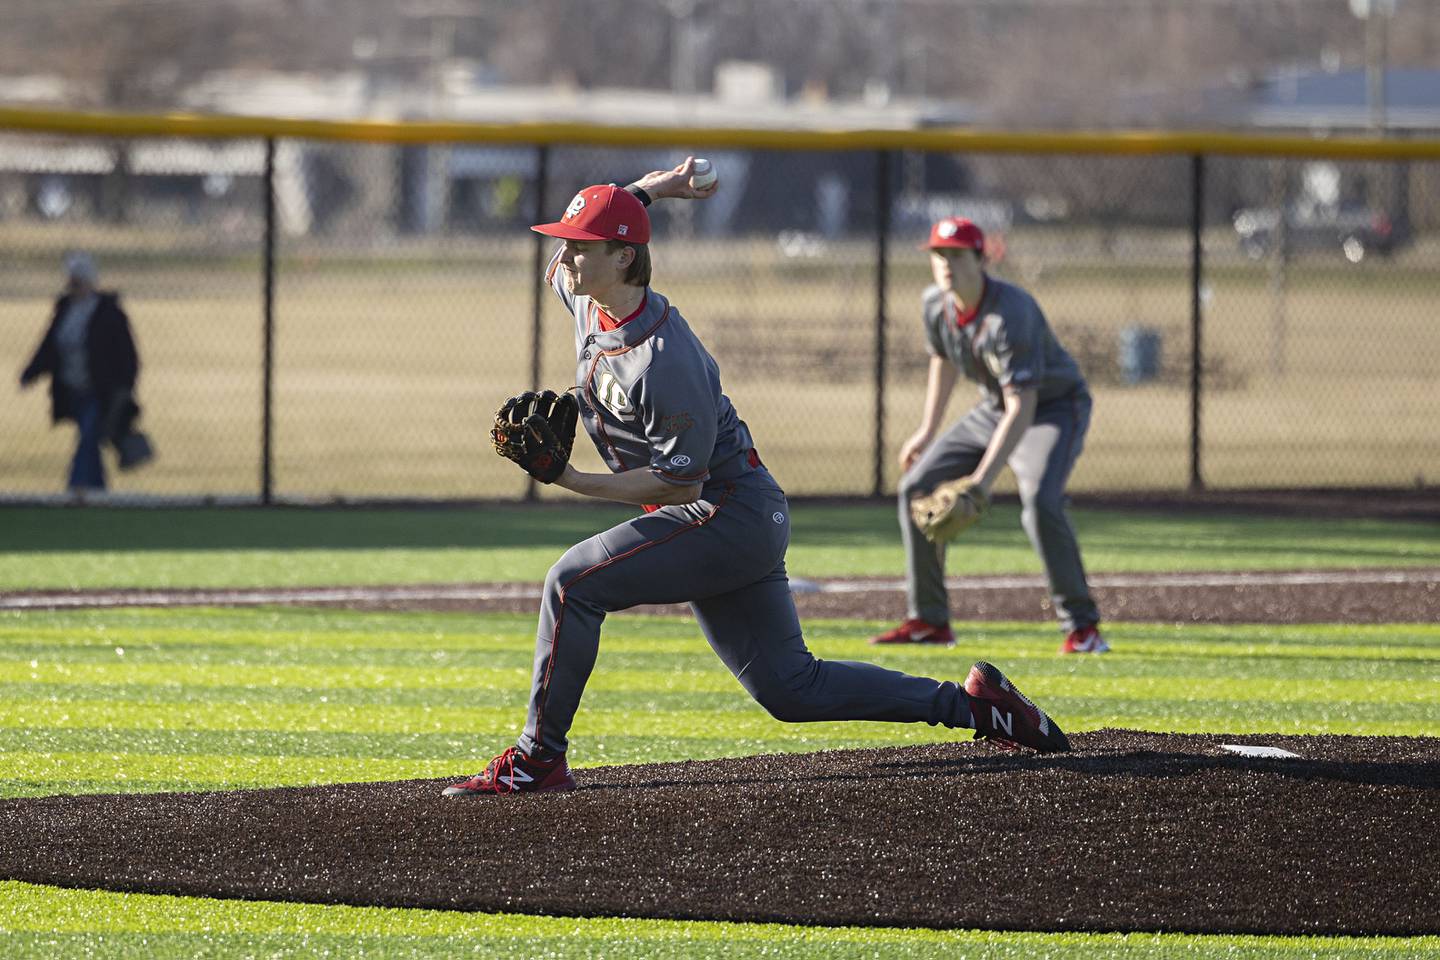 Lasalle-Peru’s Billy Mini fires a pitch against Sterling Monday, March 27, 2023.